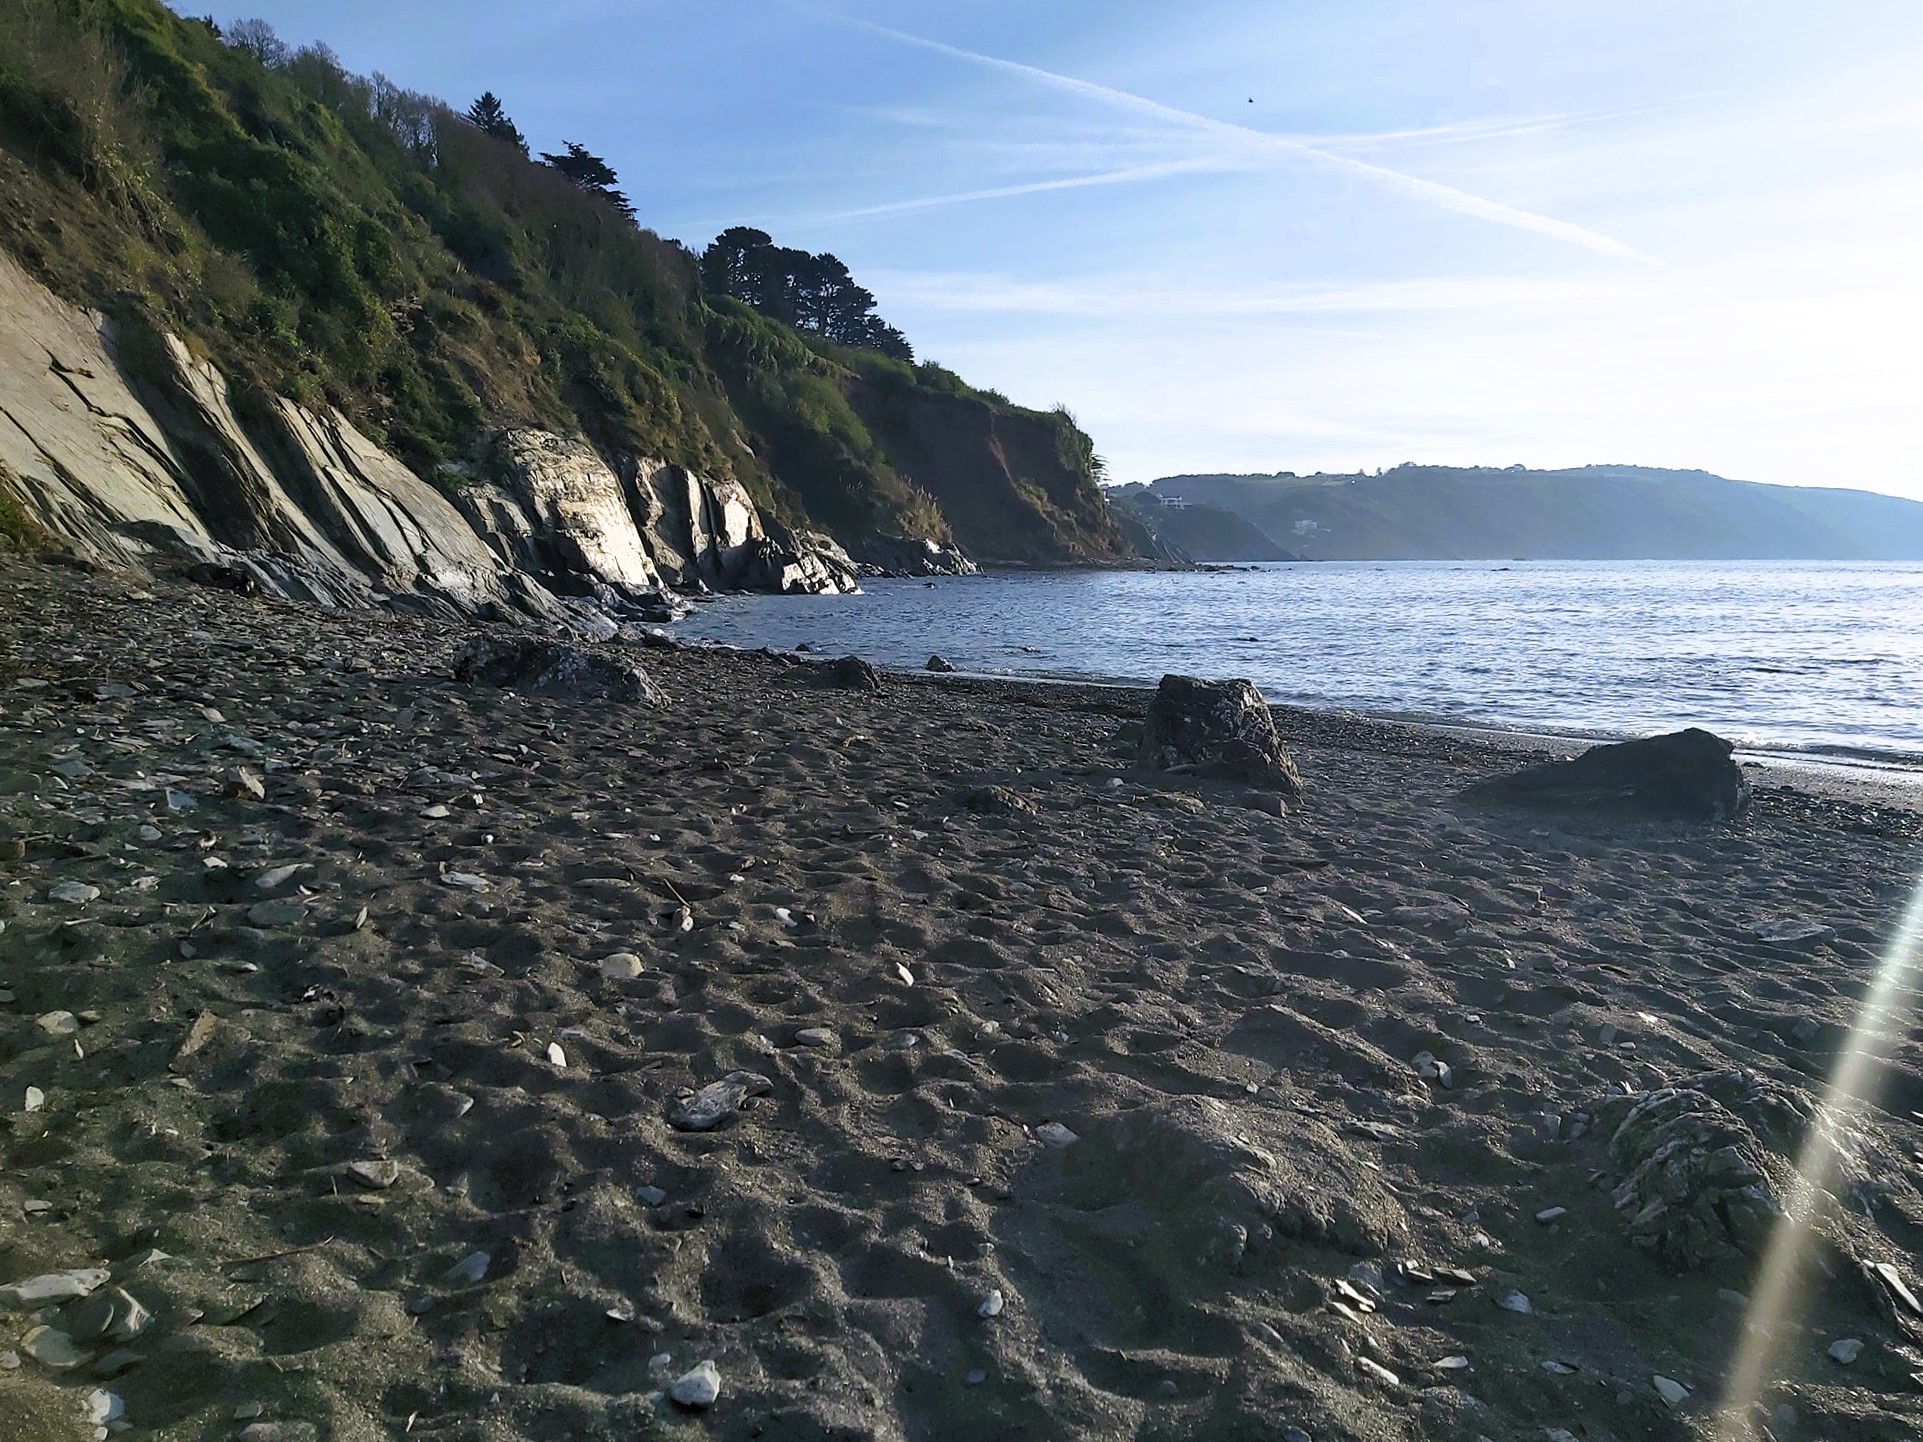 Looe beach and cliffs with trees in Cornwall, England